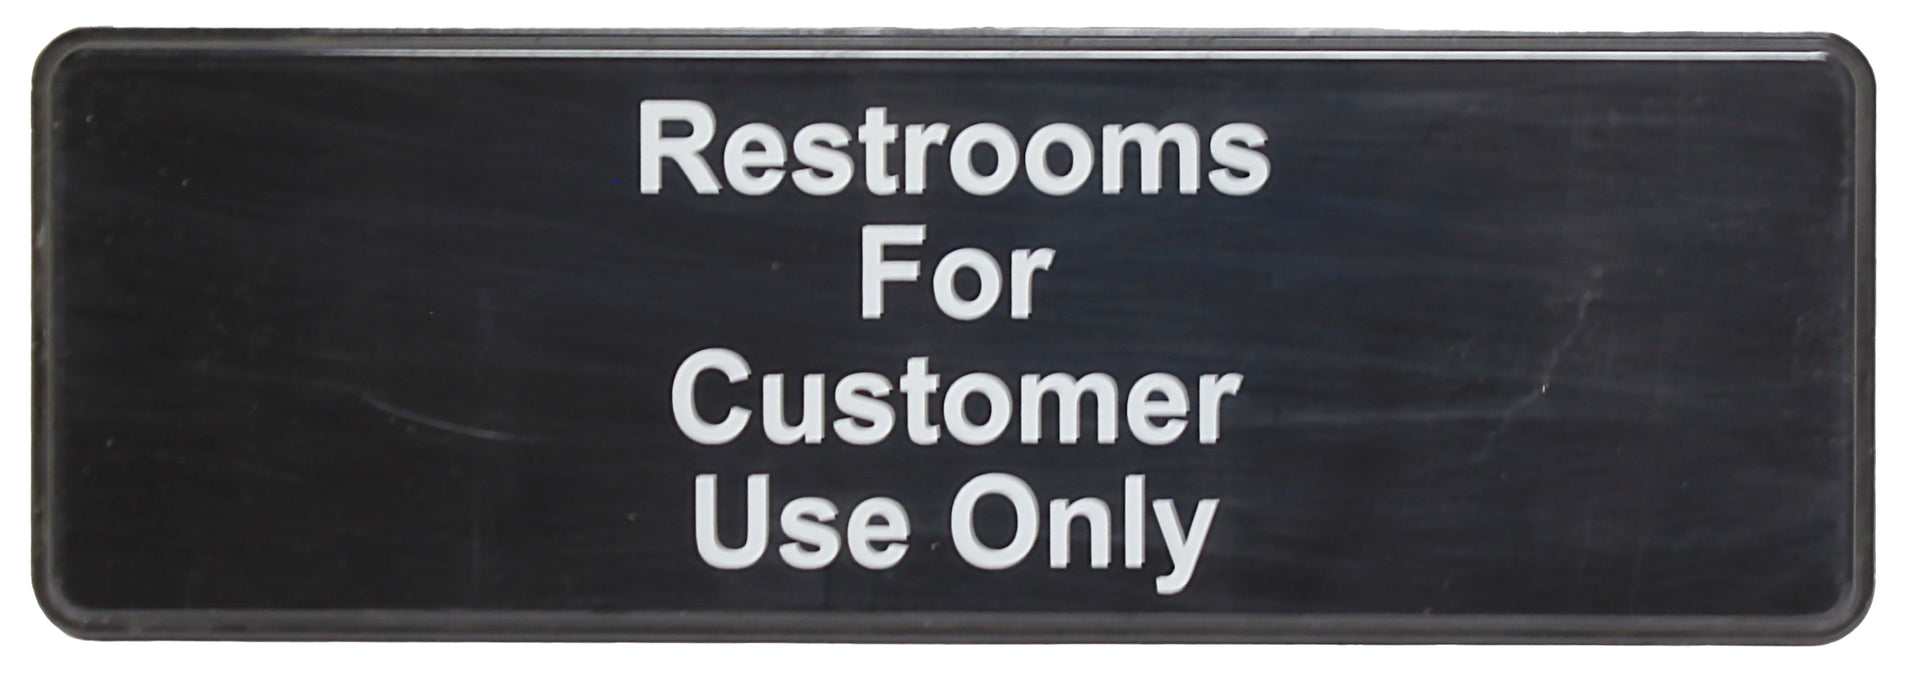 Sign 9" x 3" x 1/8", Restroom For Customers Use Only QTY-12-cityfoodequipment.com